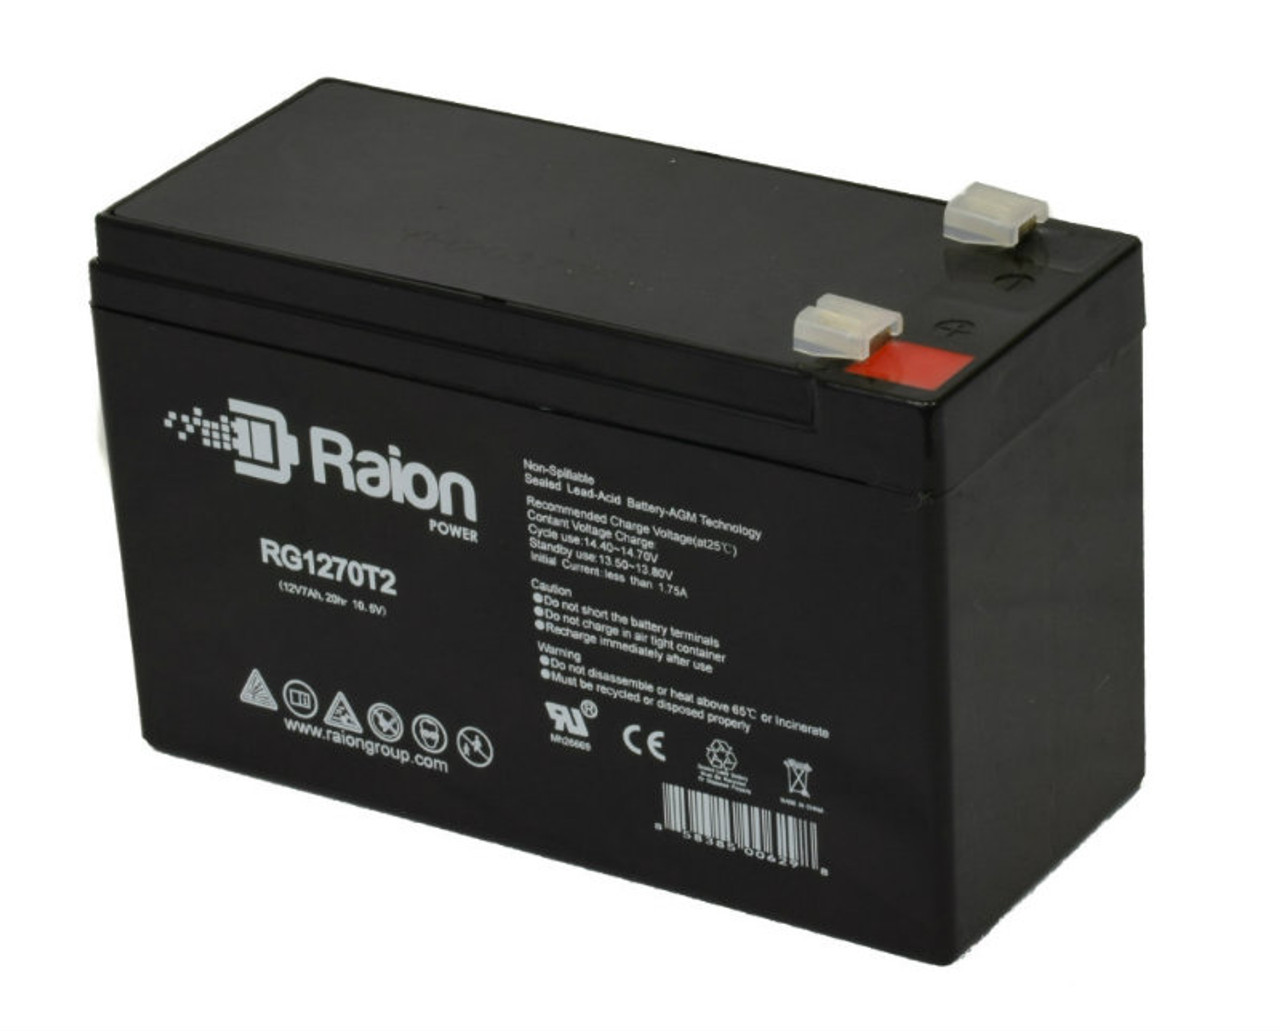 Raion Power Replacement 12V 7Ah Battery for Charity Battery CB1270 - 1 Pack